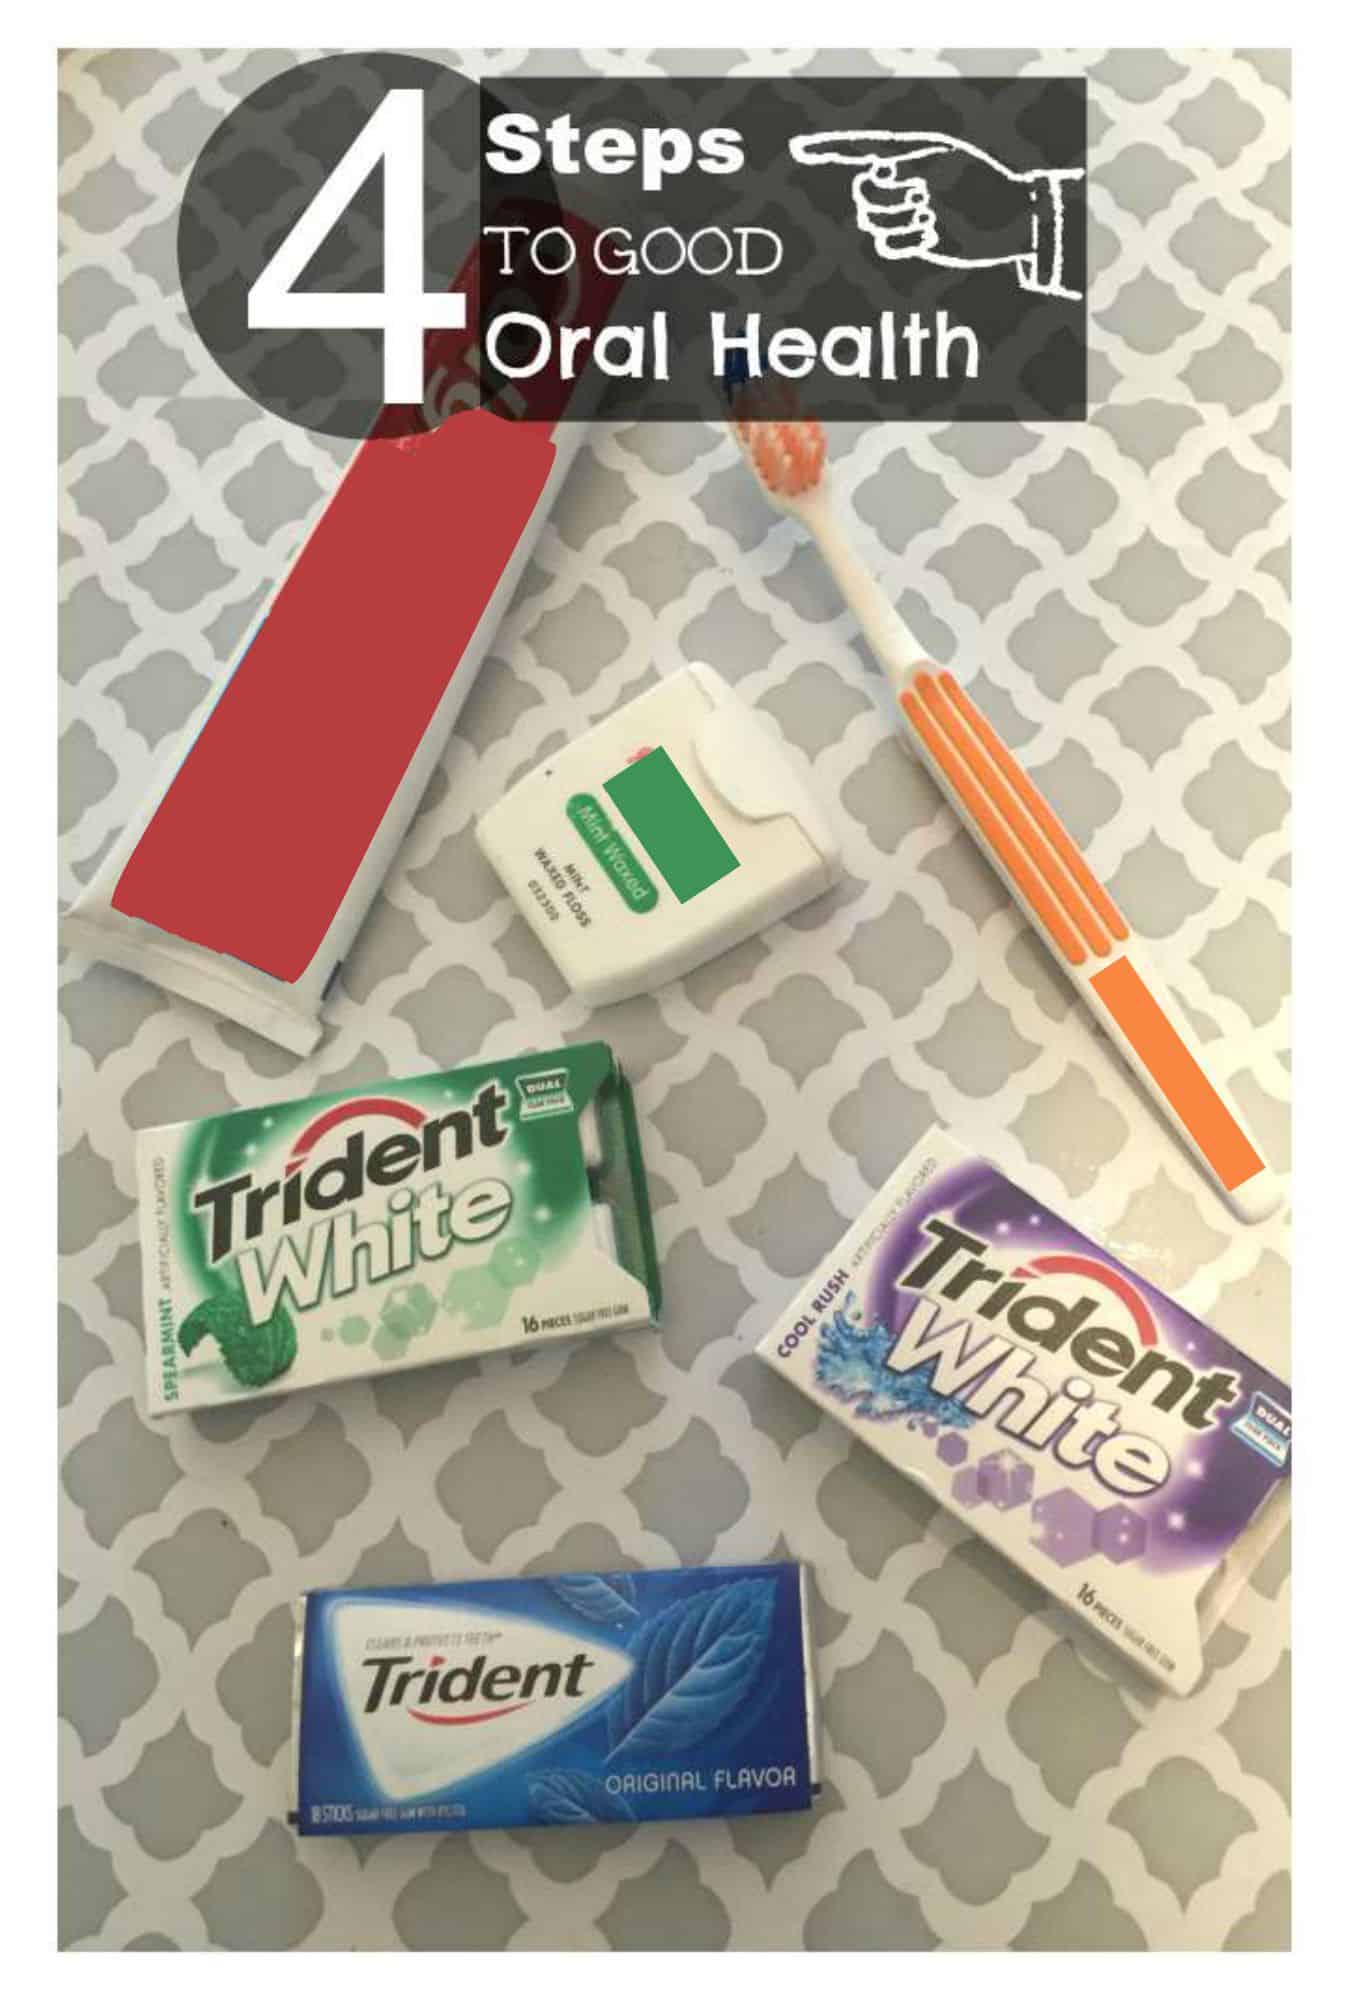 Four Easy Steps for Good Oral Health